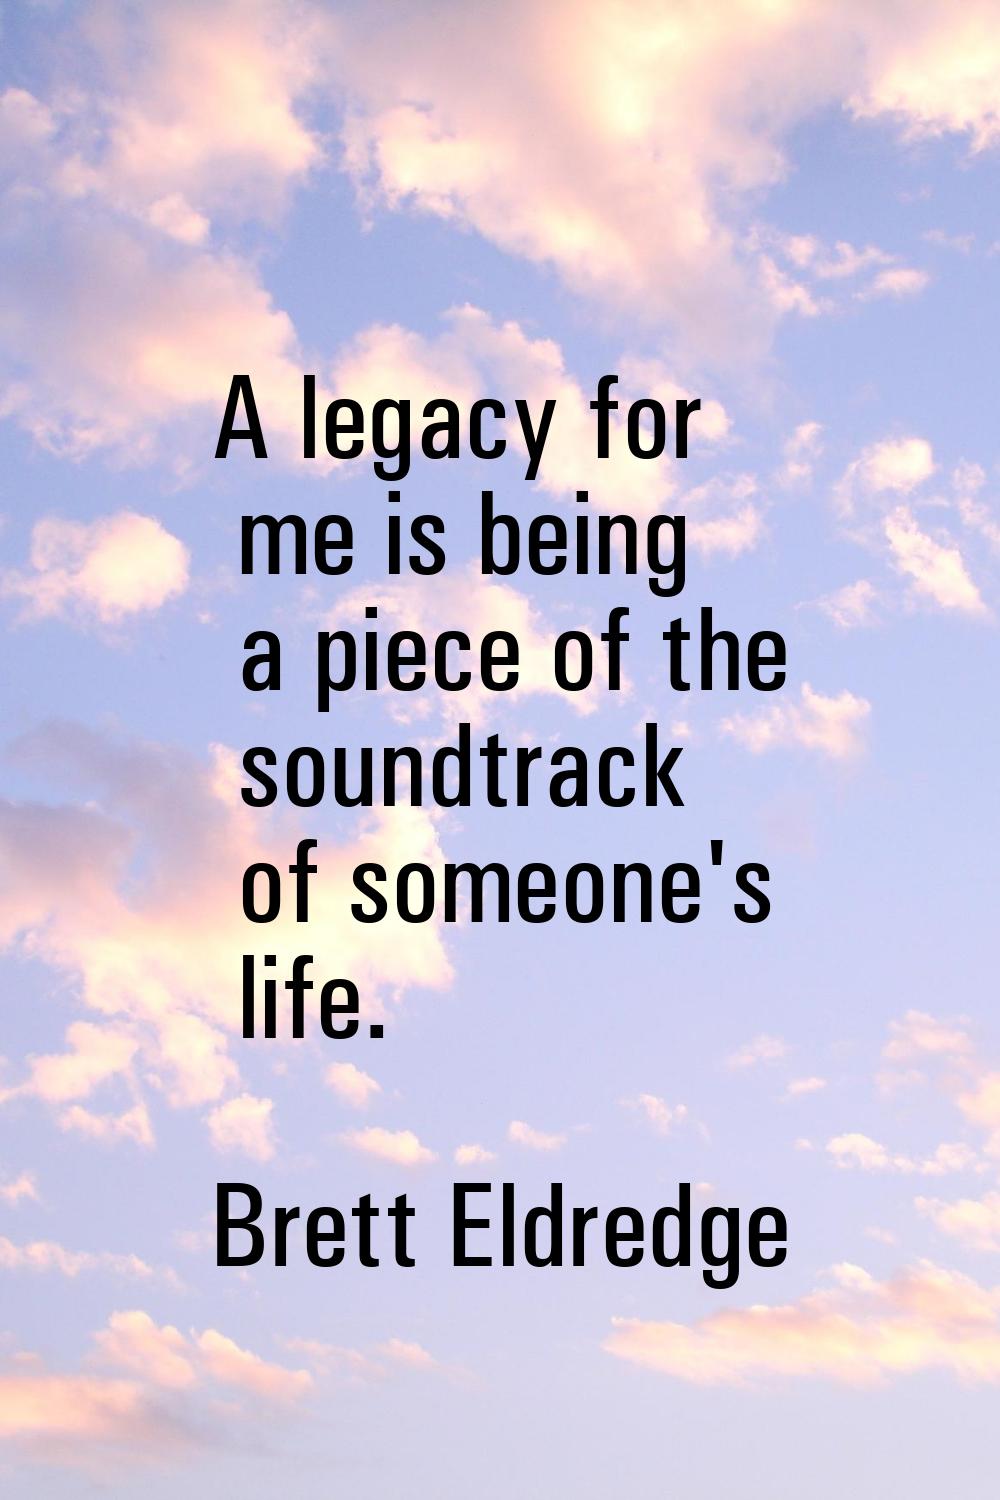 A legacy for me is being a piece of the soundtrack of someone's life.